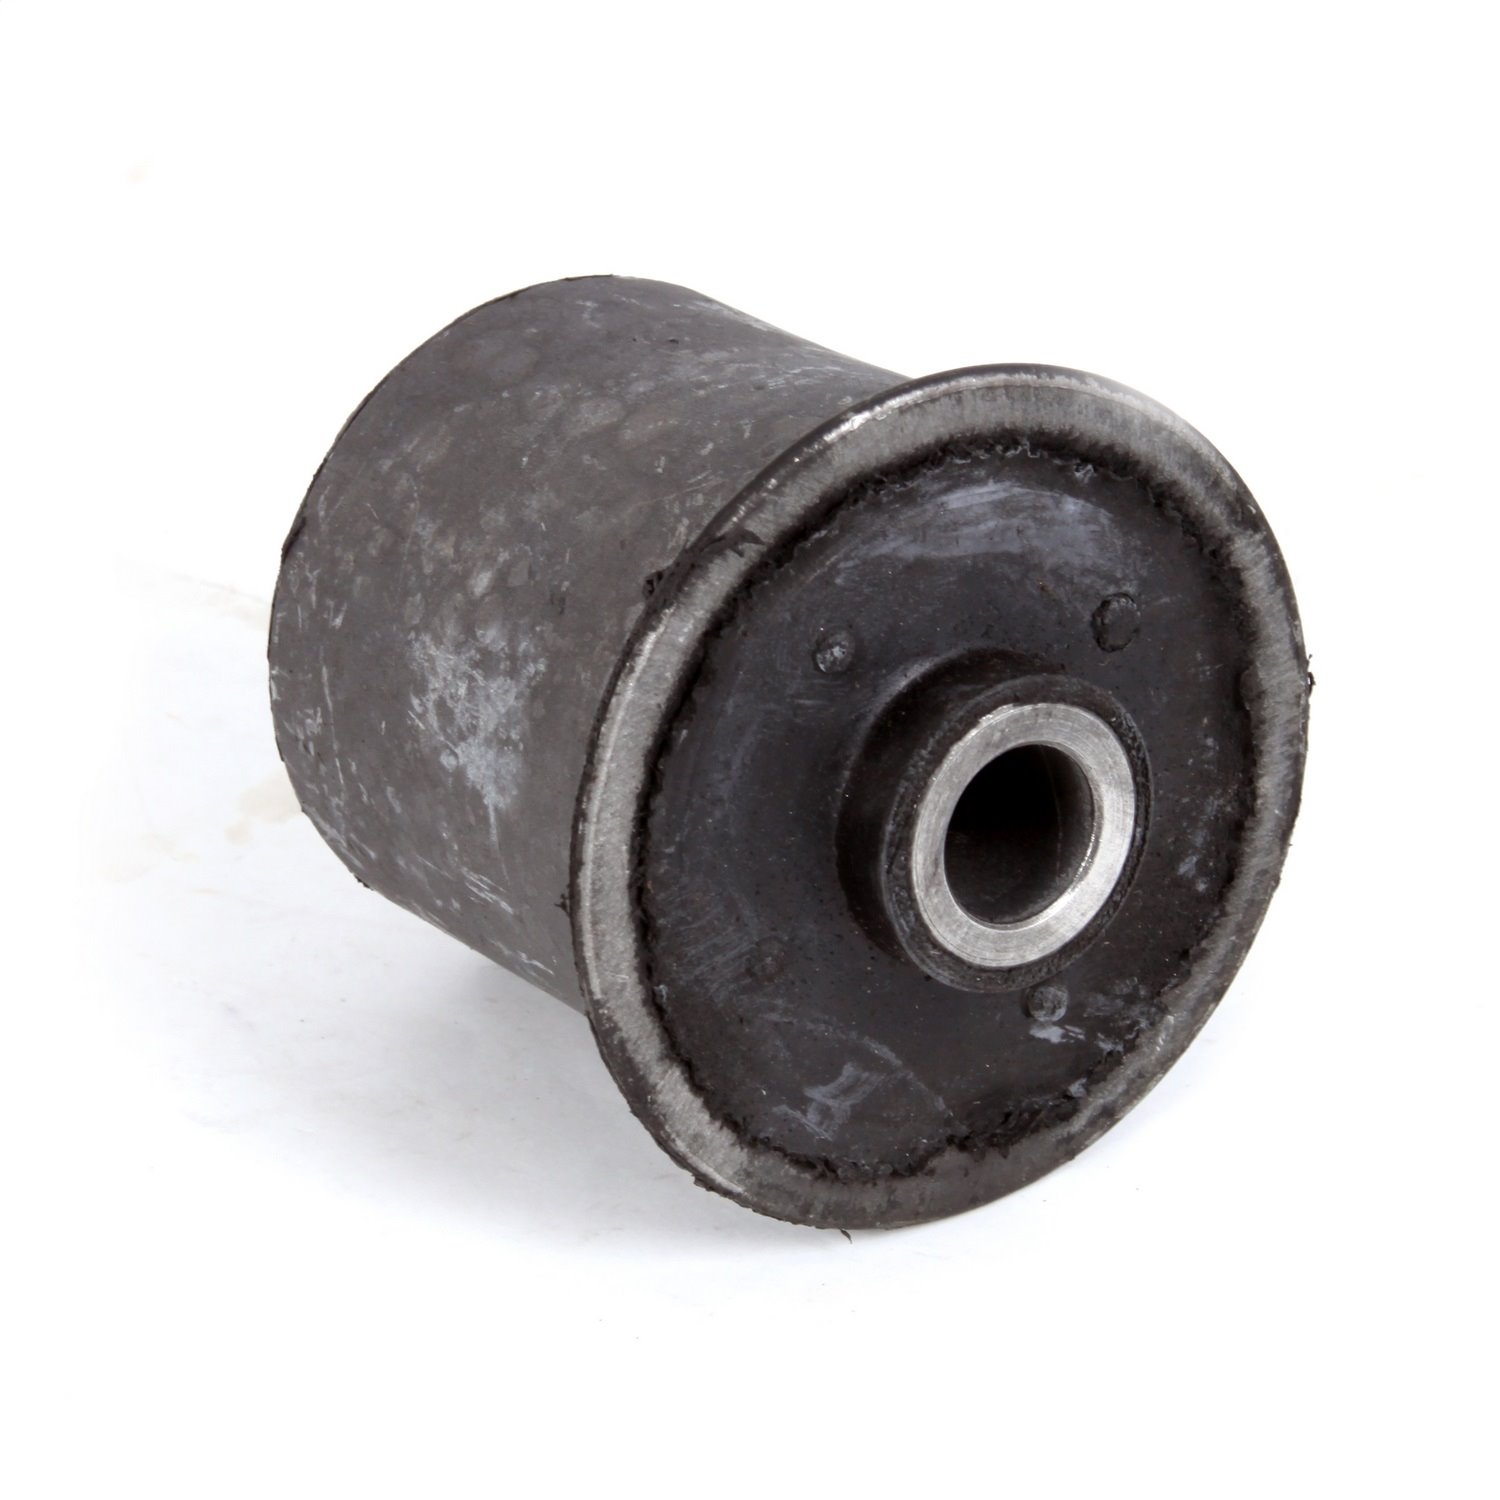 Stock replacement rear lower control arm bushing from